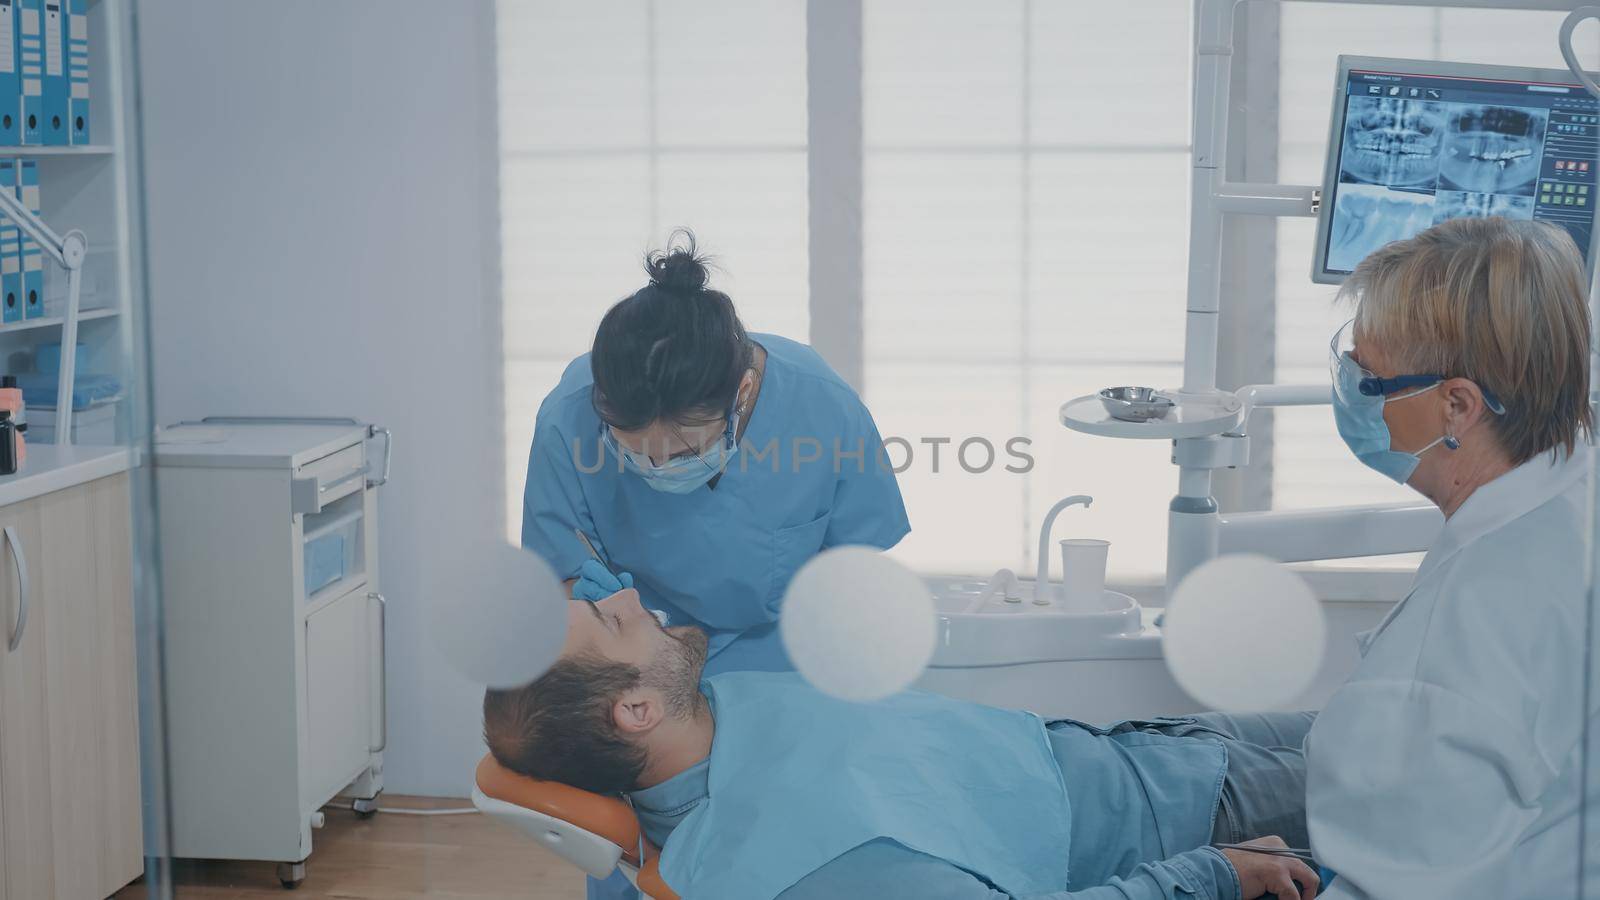 Team of experts extracting tooth at oral care clinic by DCStudio